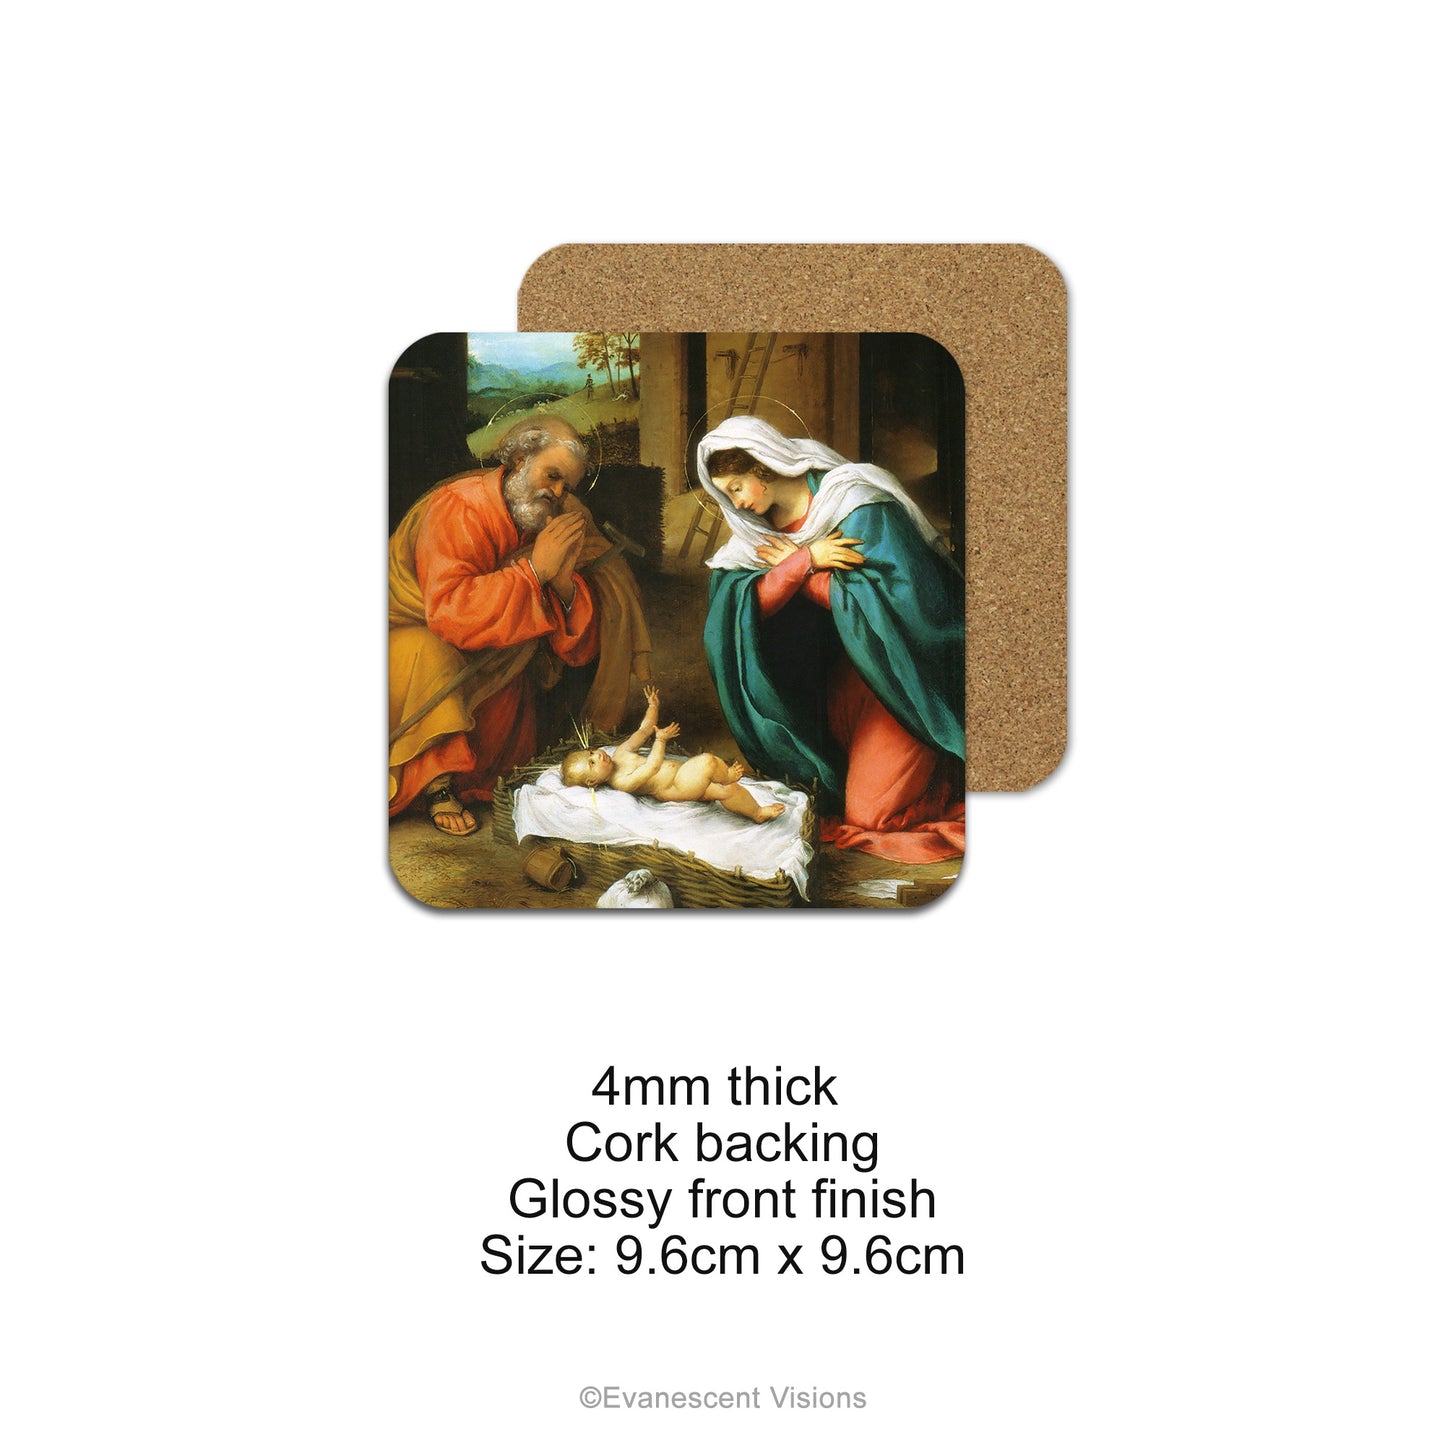 Single Nativity Coaster with cork back and product details